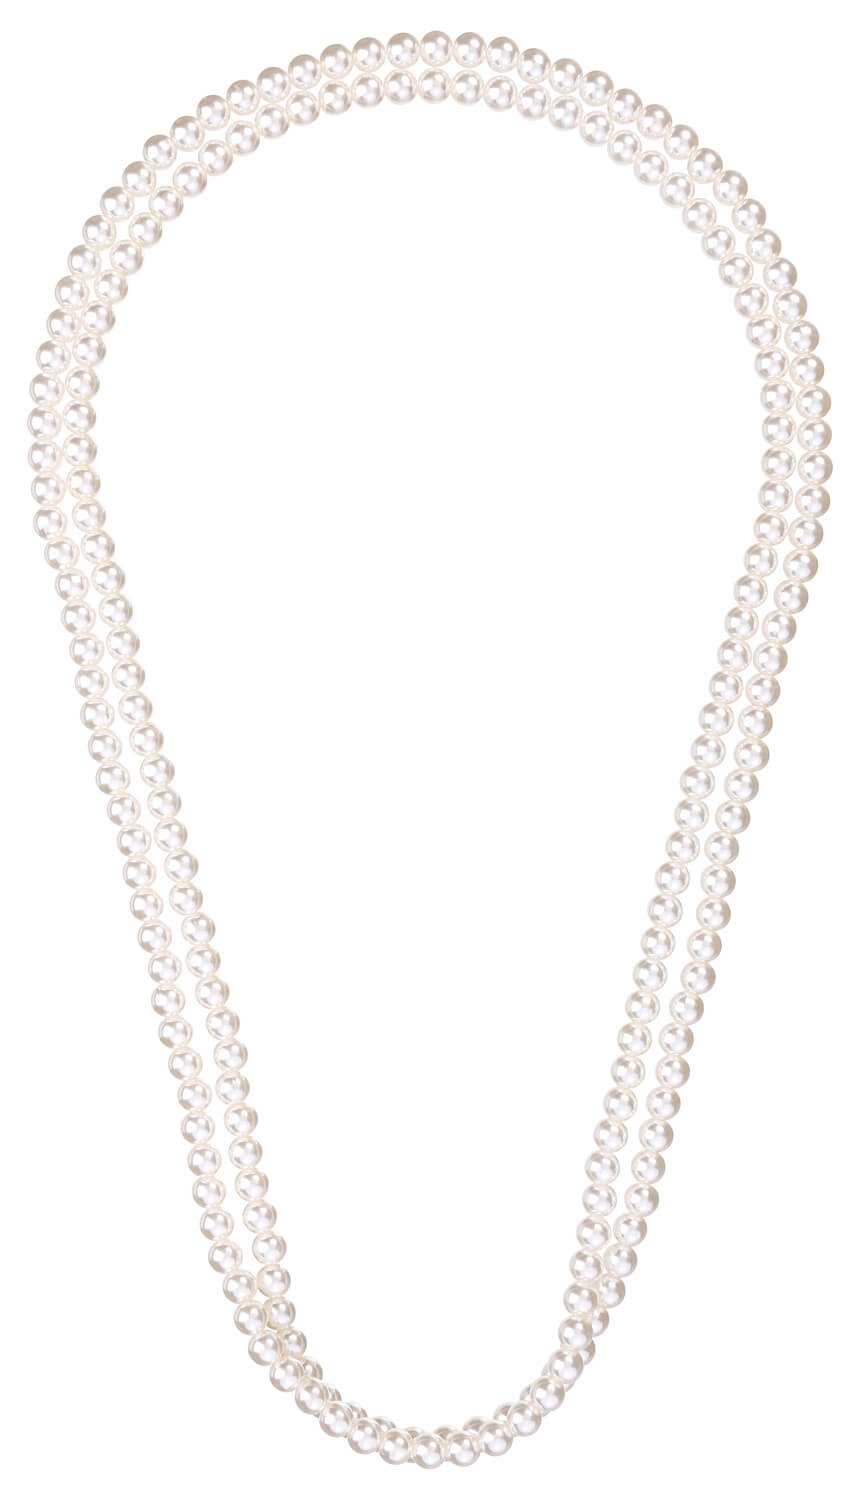 Necklace - Infinite Pearls